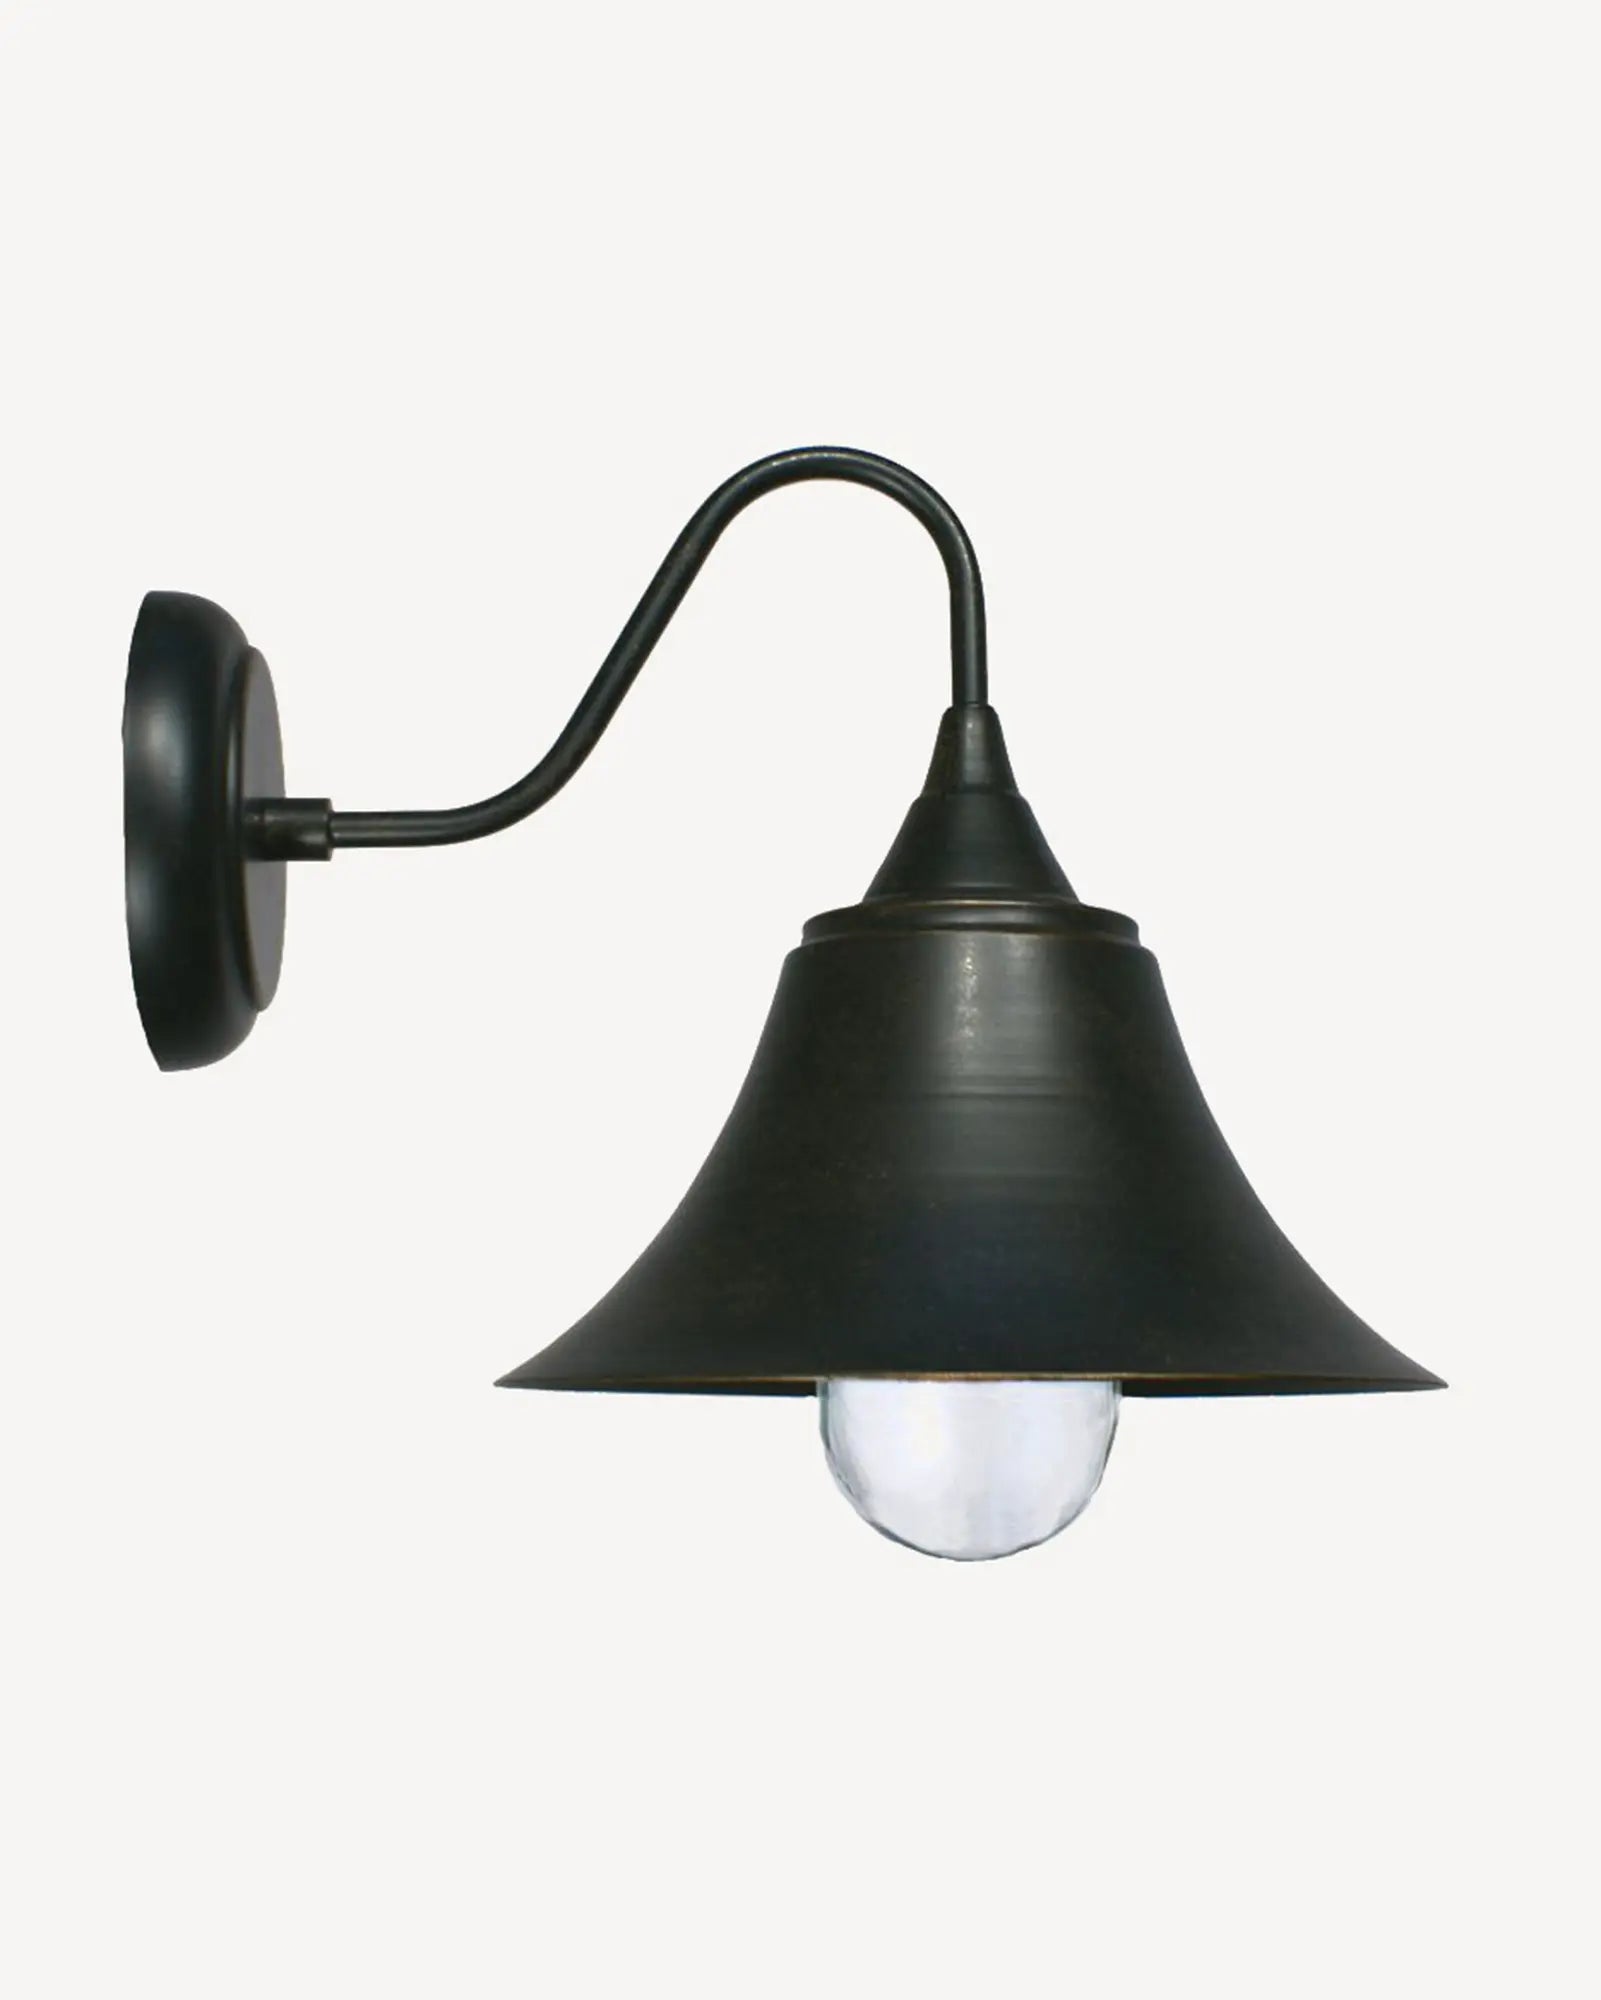 Causeway Outdoor wall light by Inspiration Light at Nook Collections